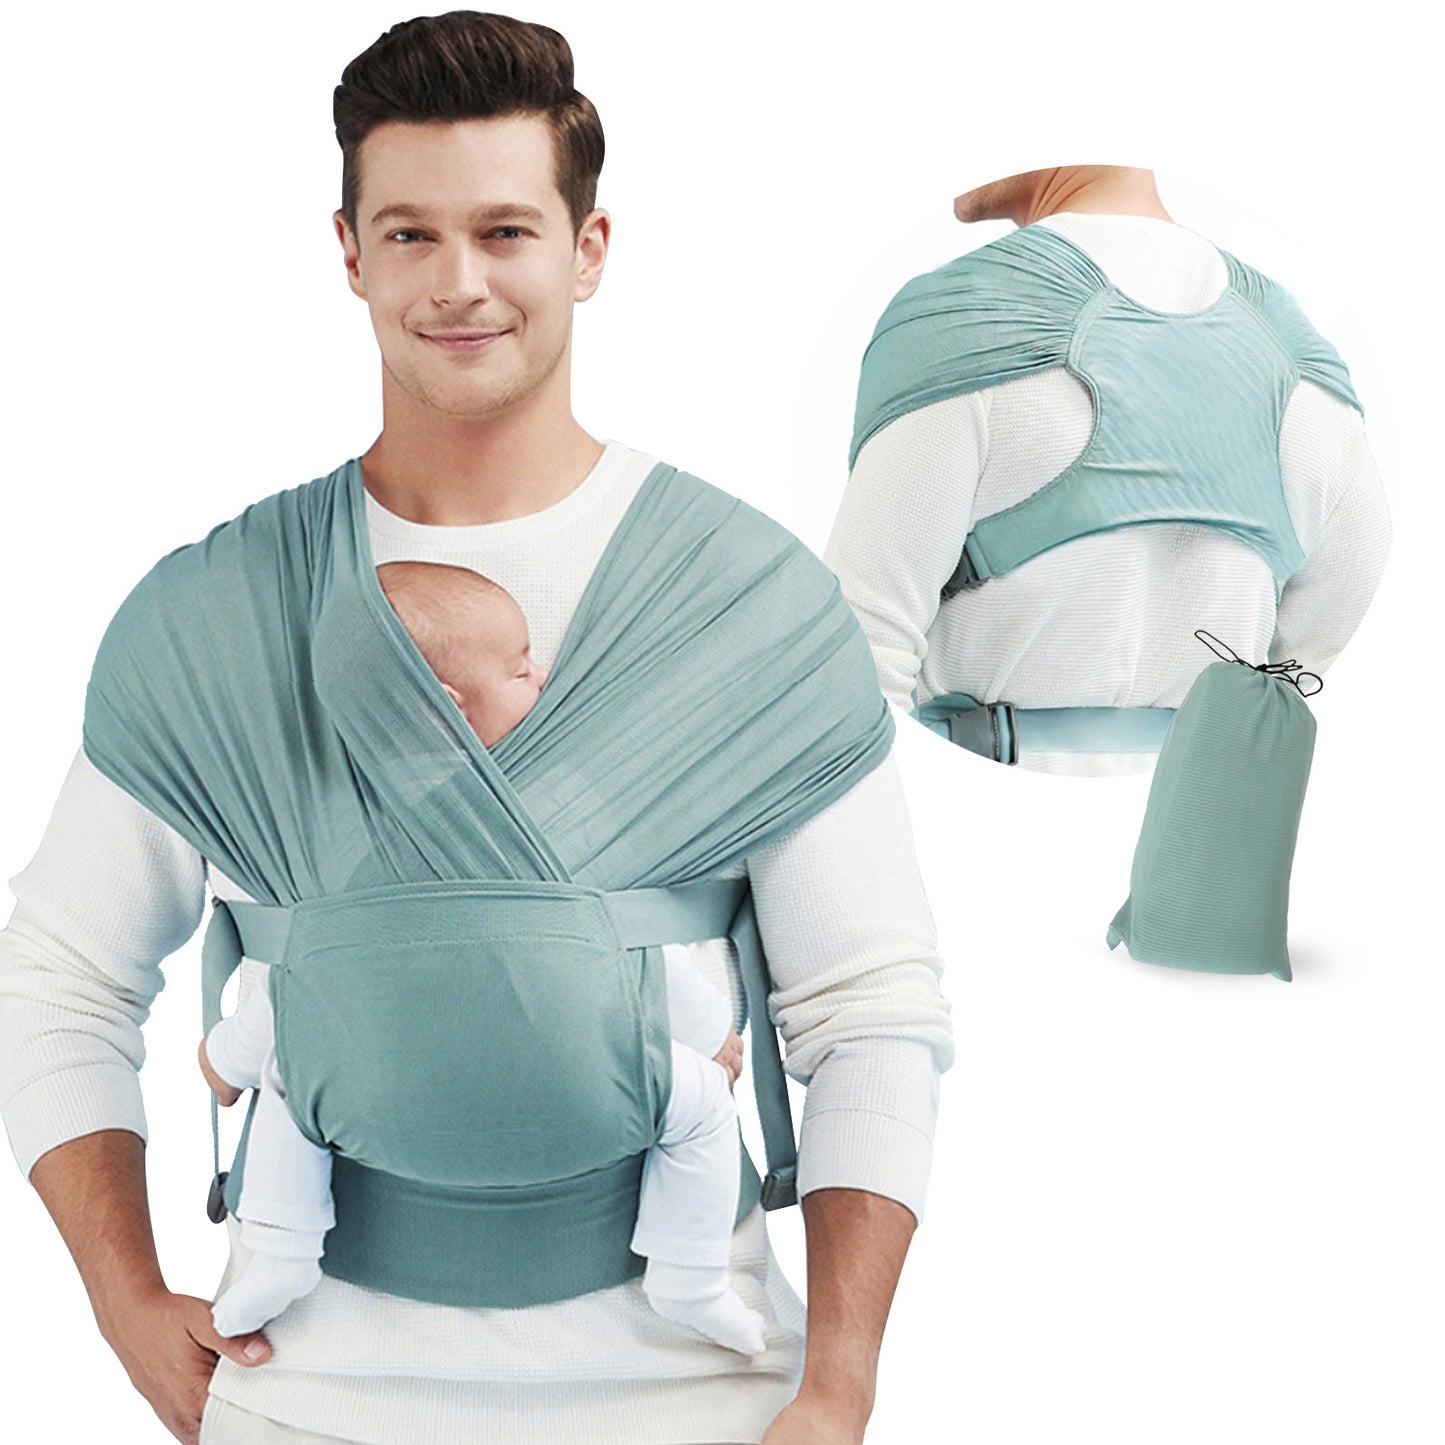 Baby Sling Wrap Stretchy Carrier